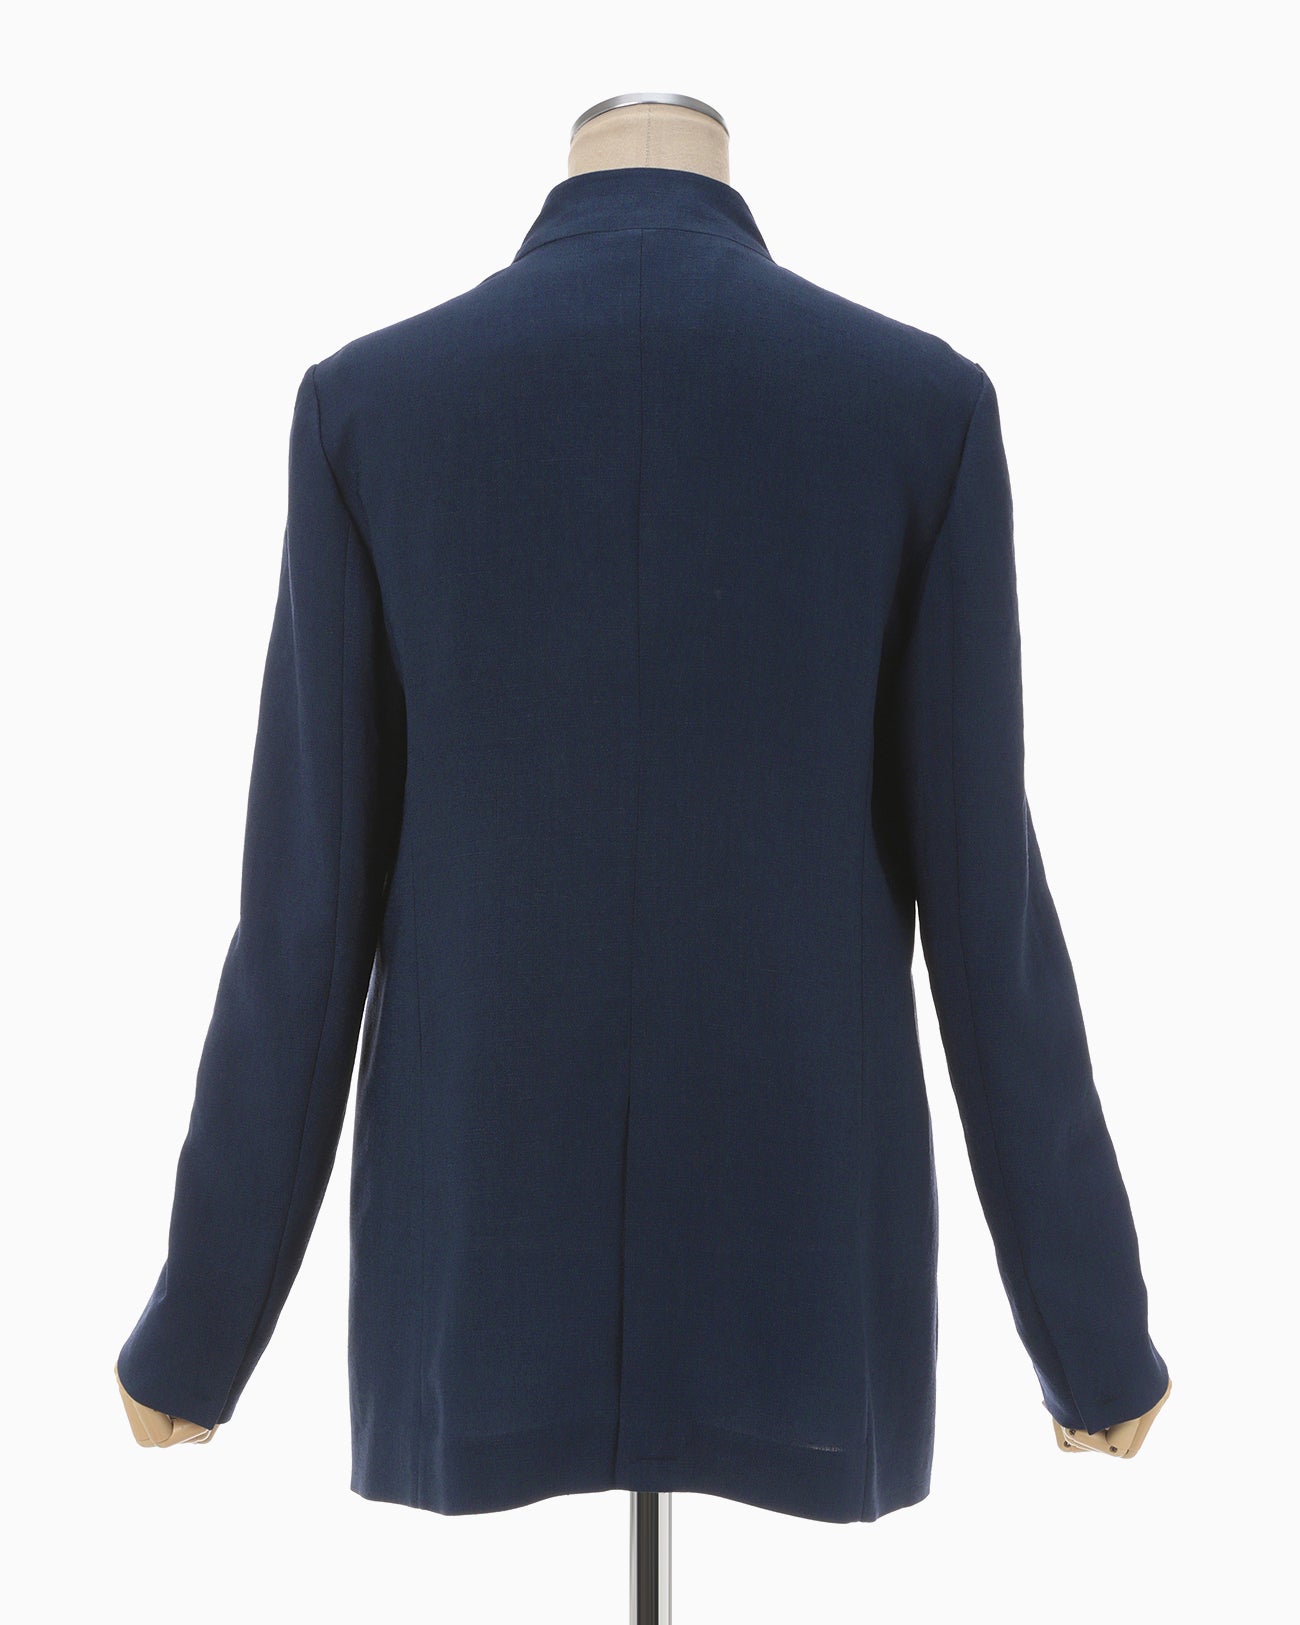 Linen Touch Triacetate Collarless Double Breasted Jacket - navy